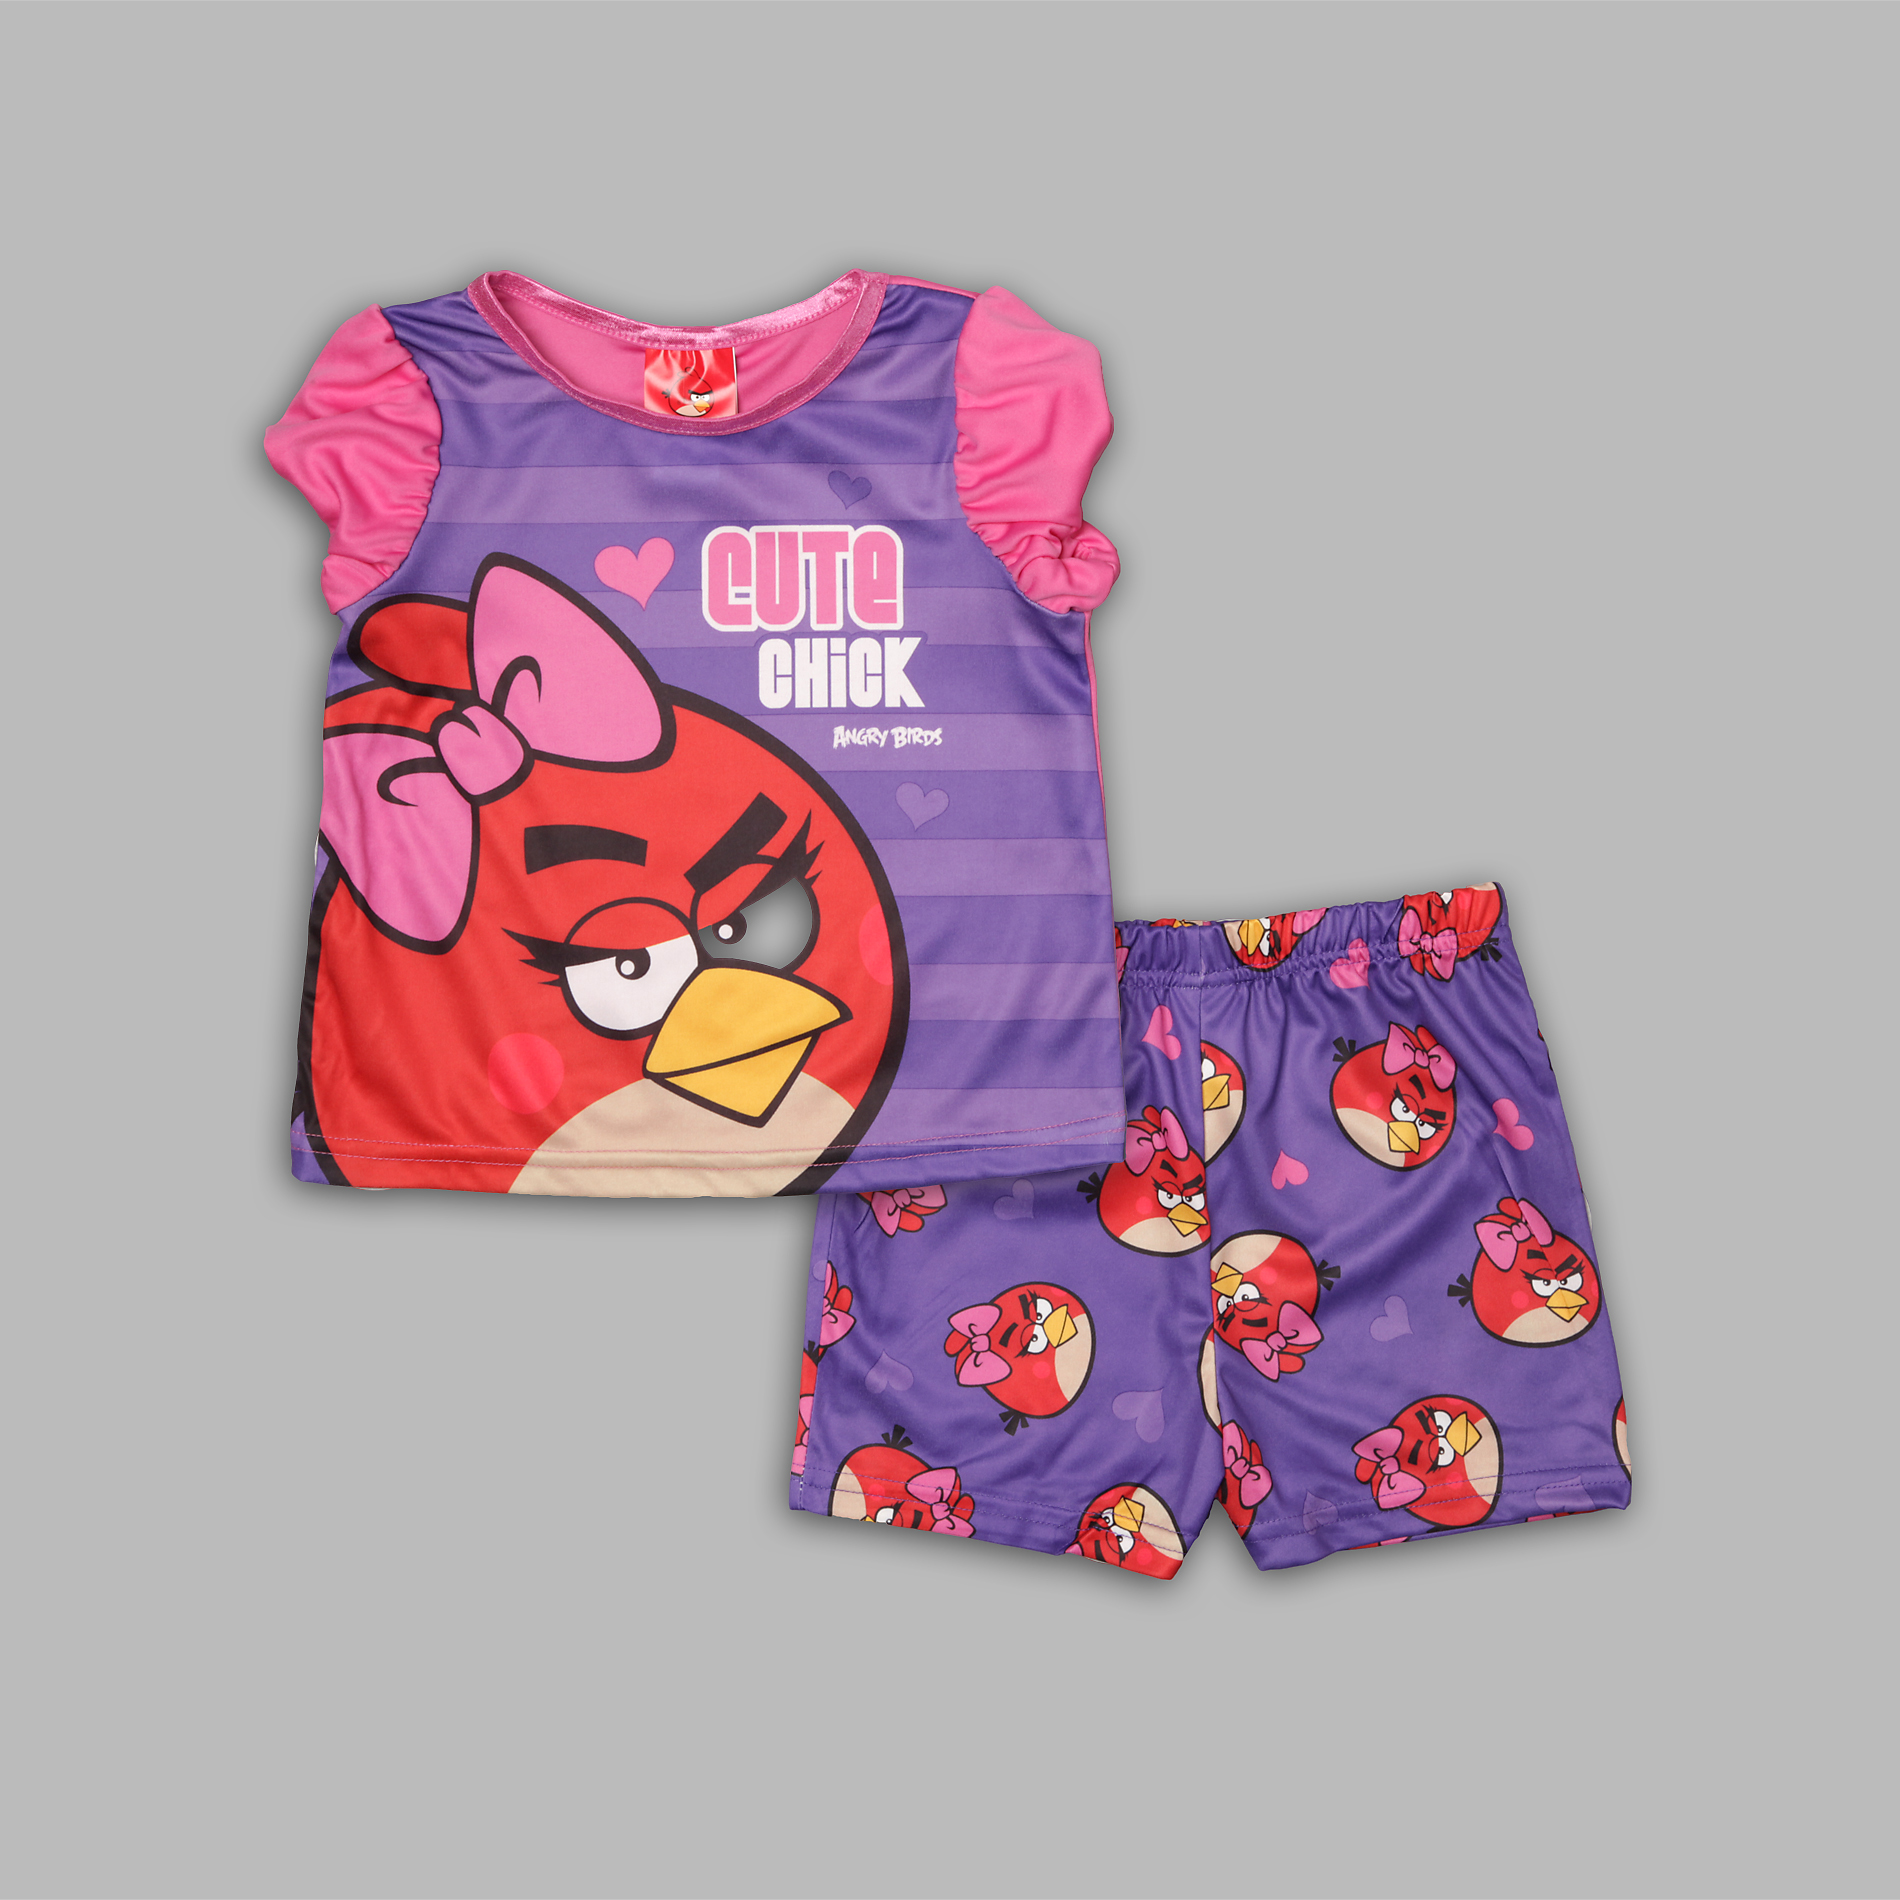 Angry Birds Toddler Girl&#8217;s 2 Pc Short Sleeve &#8216;Cute Chick&#8217; Pajama Set